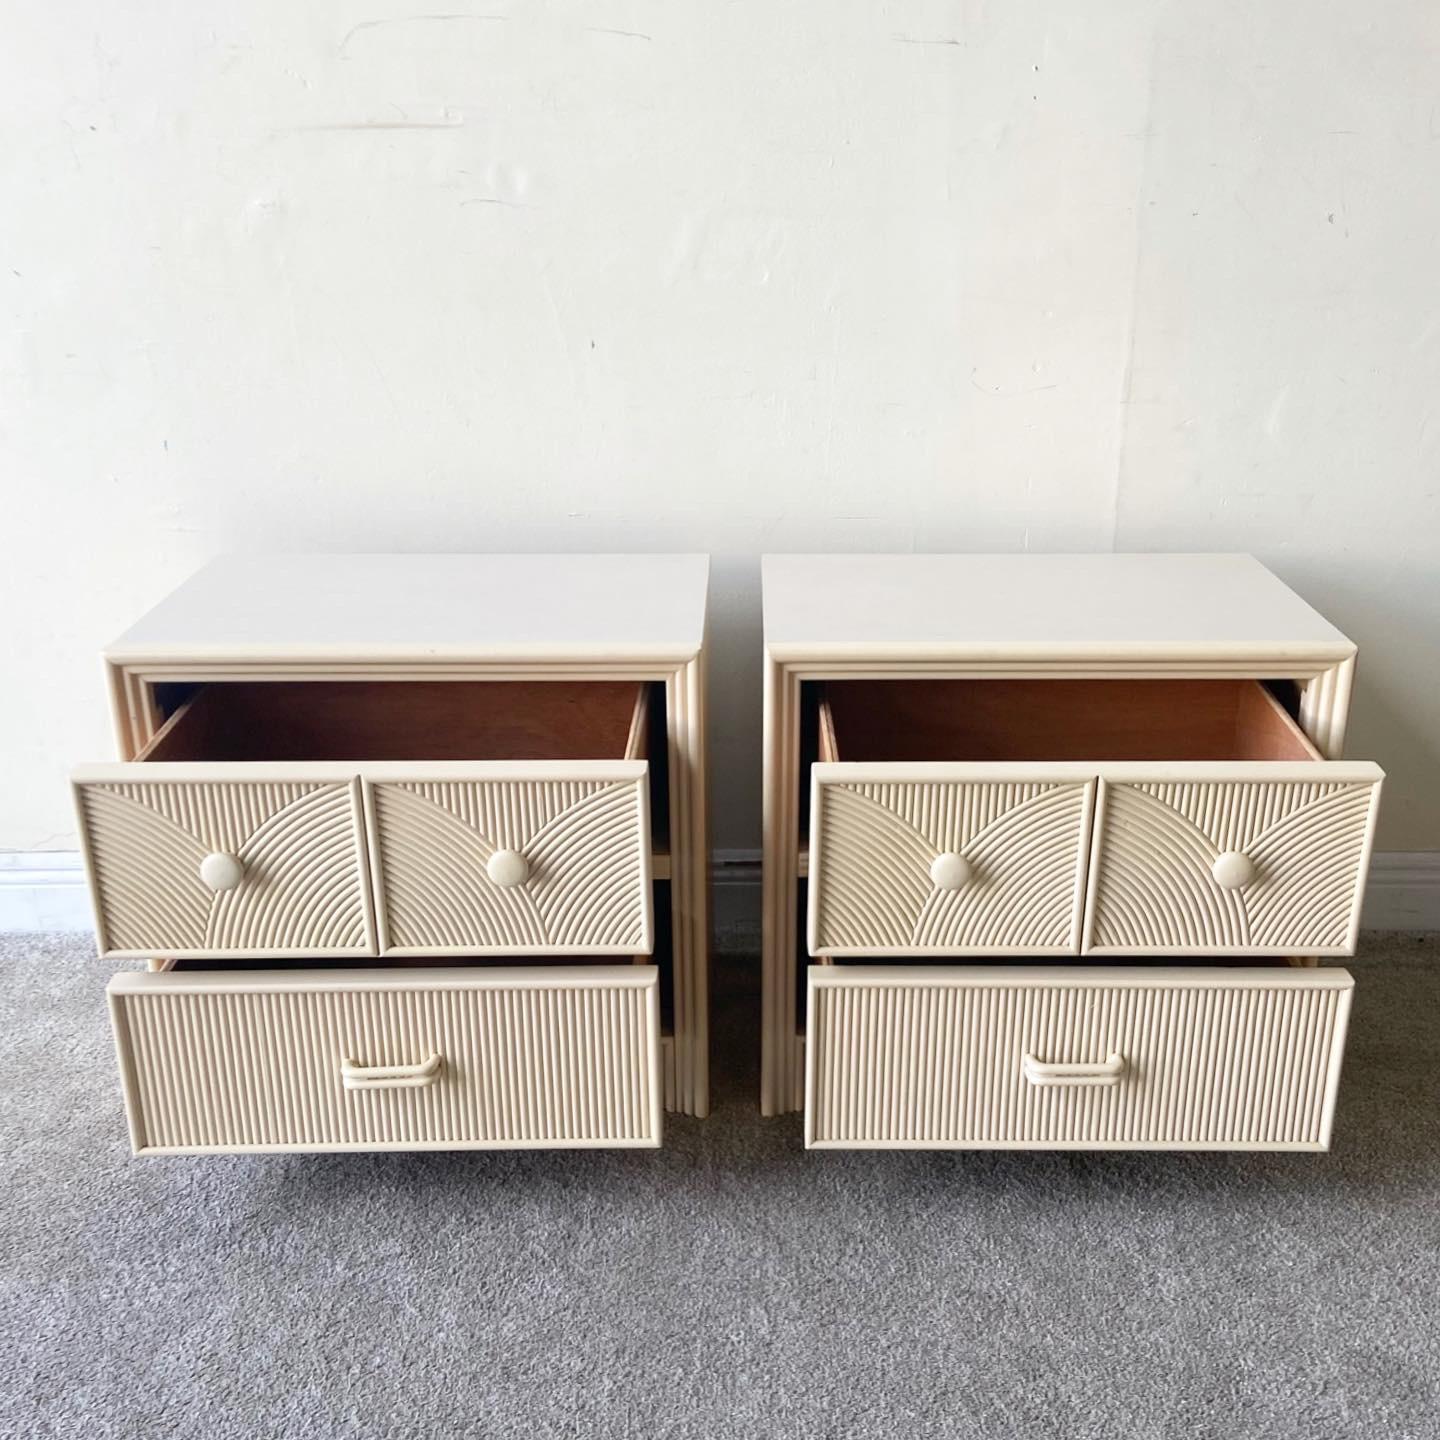 Excellent pair of boho nighstands by Stanley Furniture Co. Features two spacious drawers with a pencil reed drawer face.
 